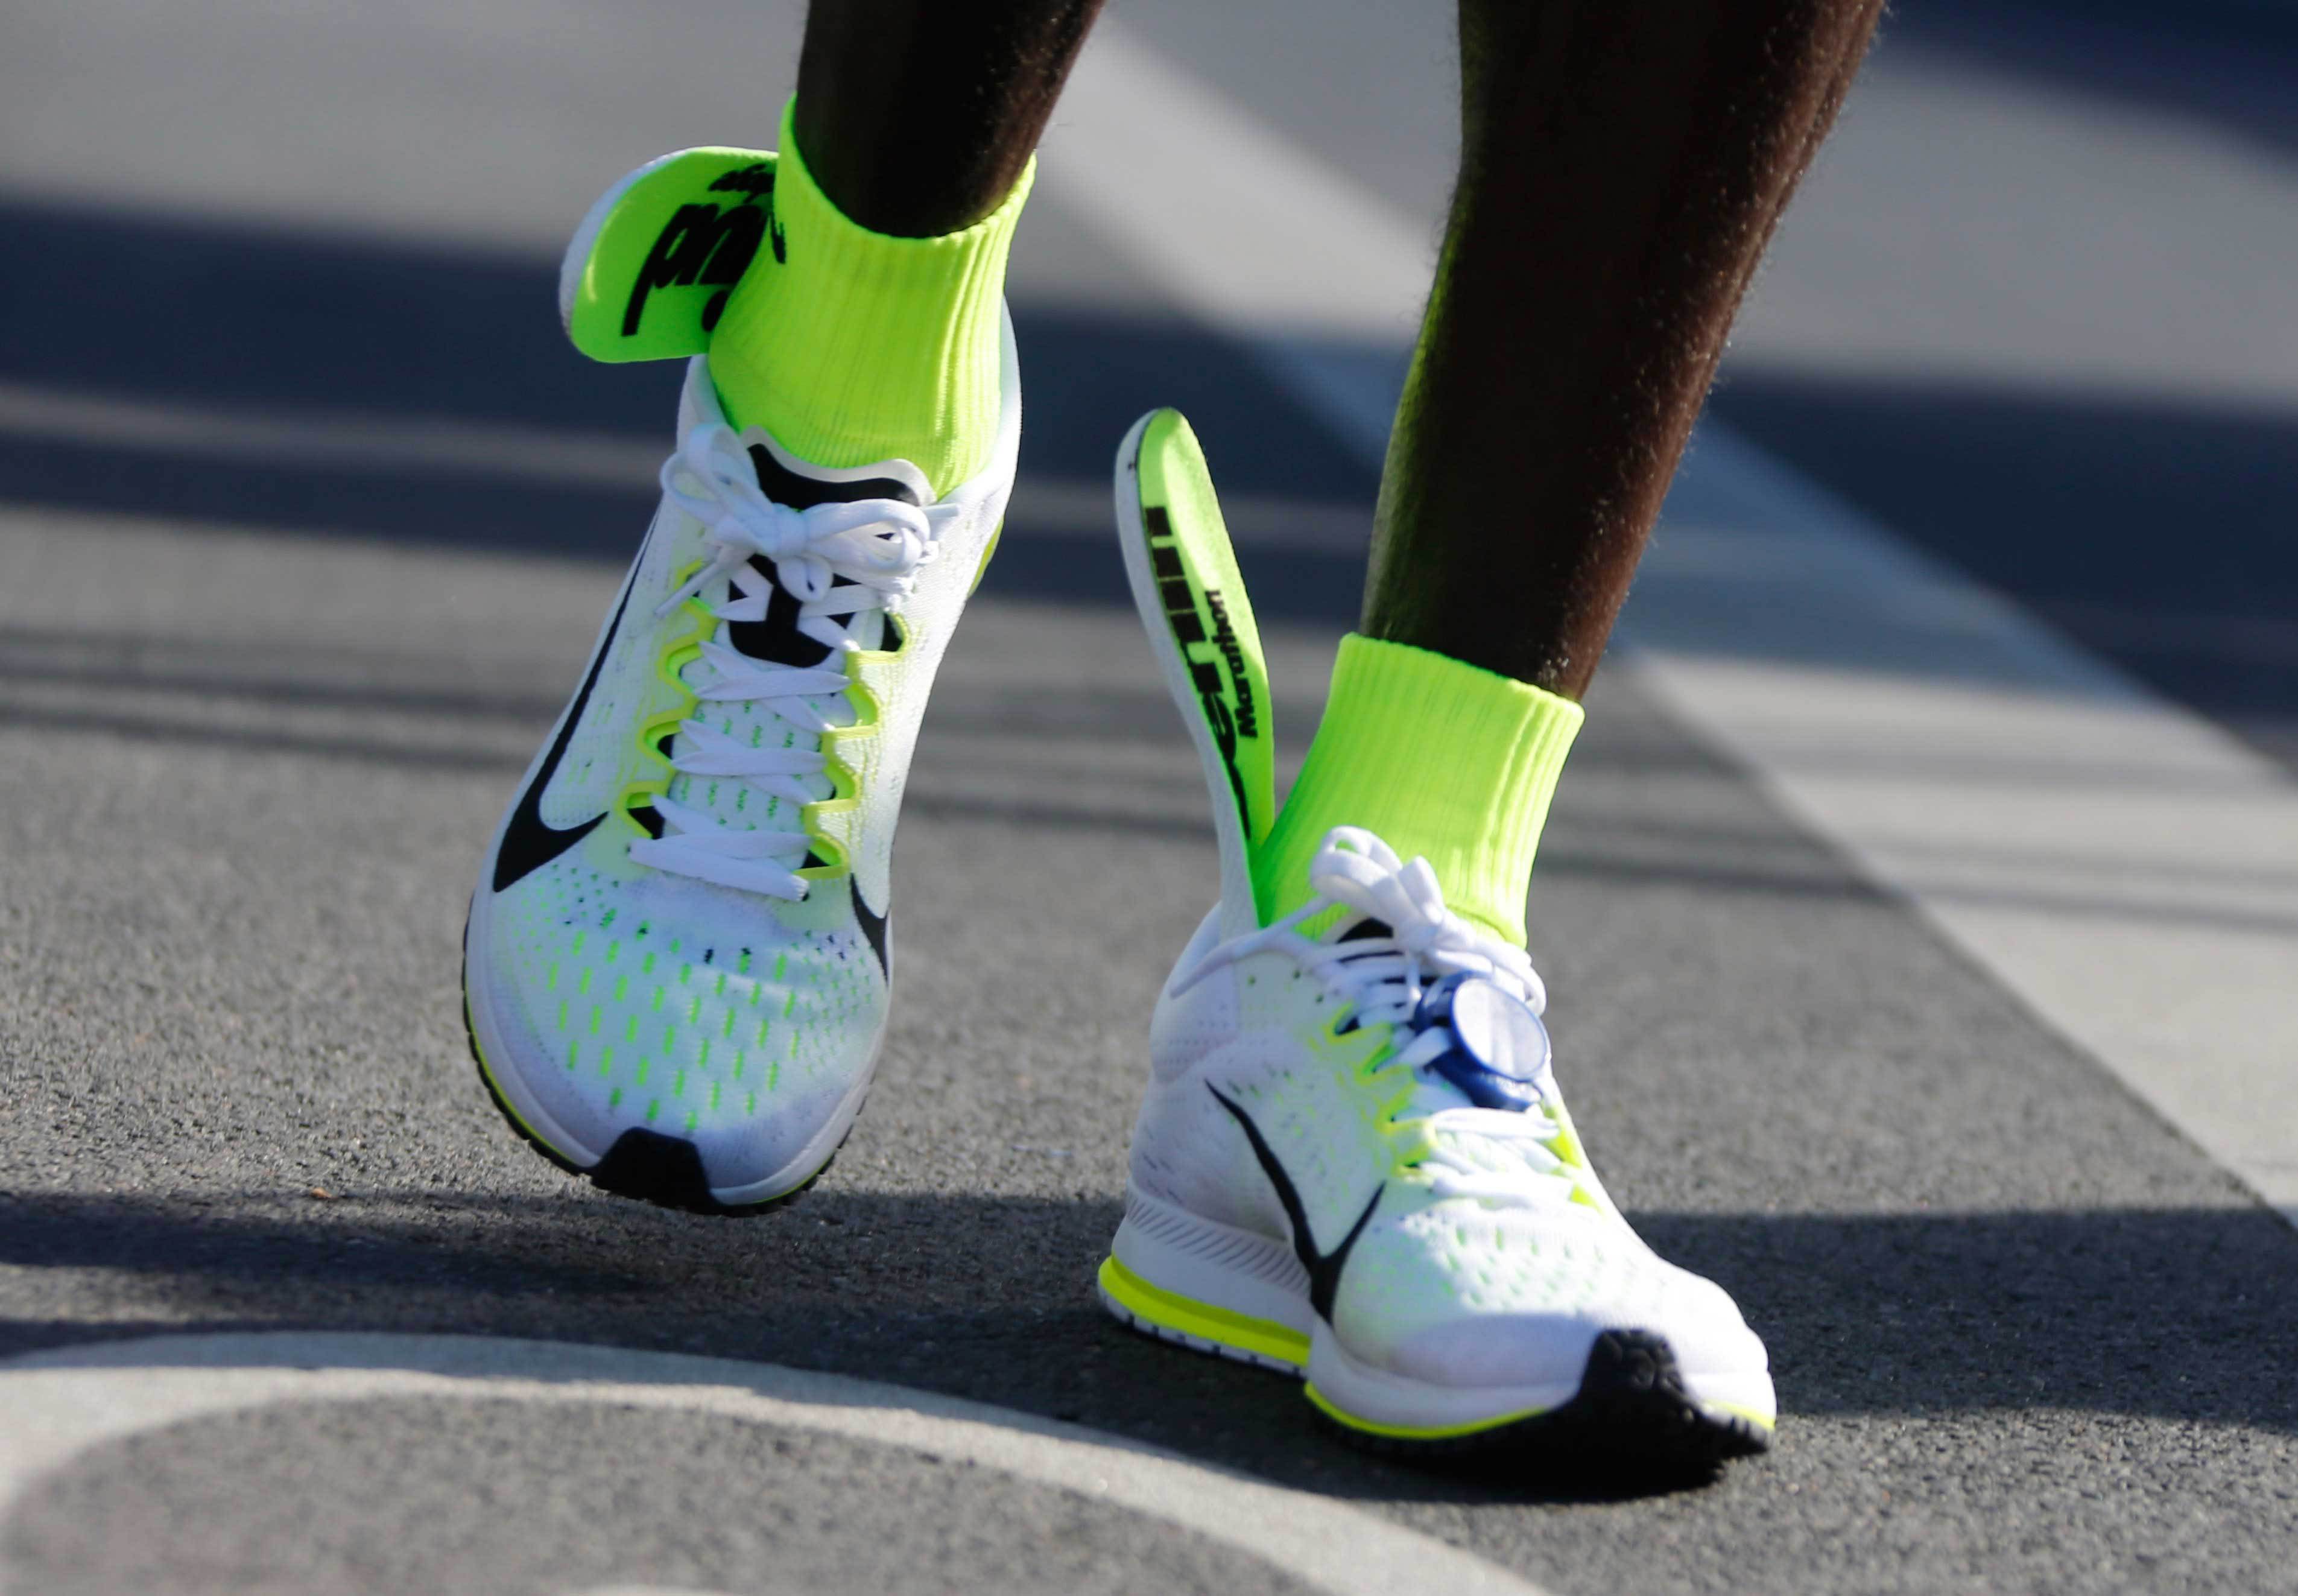 The insoles of Kenya's Eliud Kipchoge's running shoes are seen slipping up to his ankles, after he crosses the finish line to win the men's 42nd Berlin marathon, in Berlin, Germany September 27, 2015. (© Hannibal Hanschke / Reuters&mdash;REUTERS)